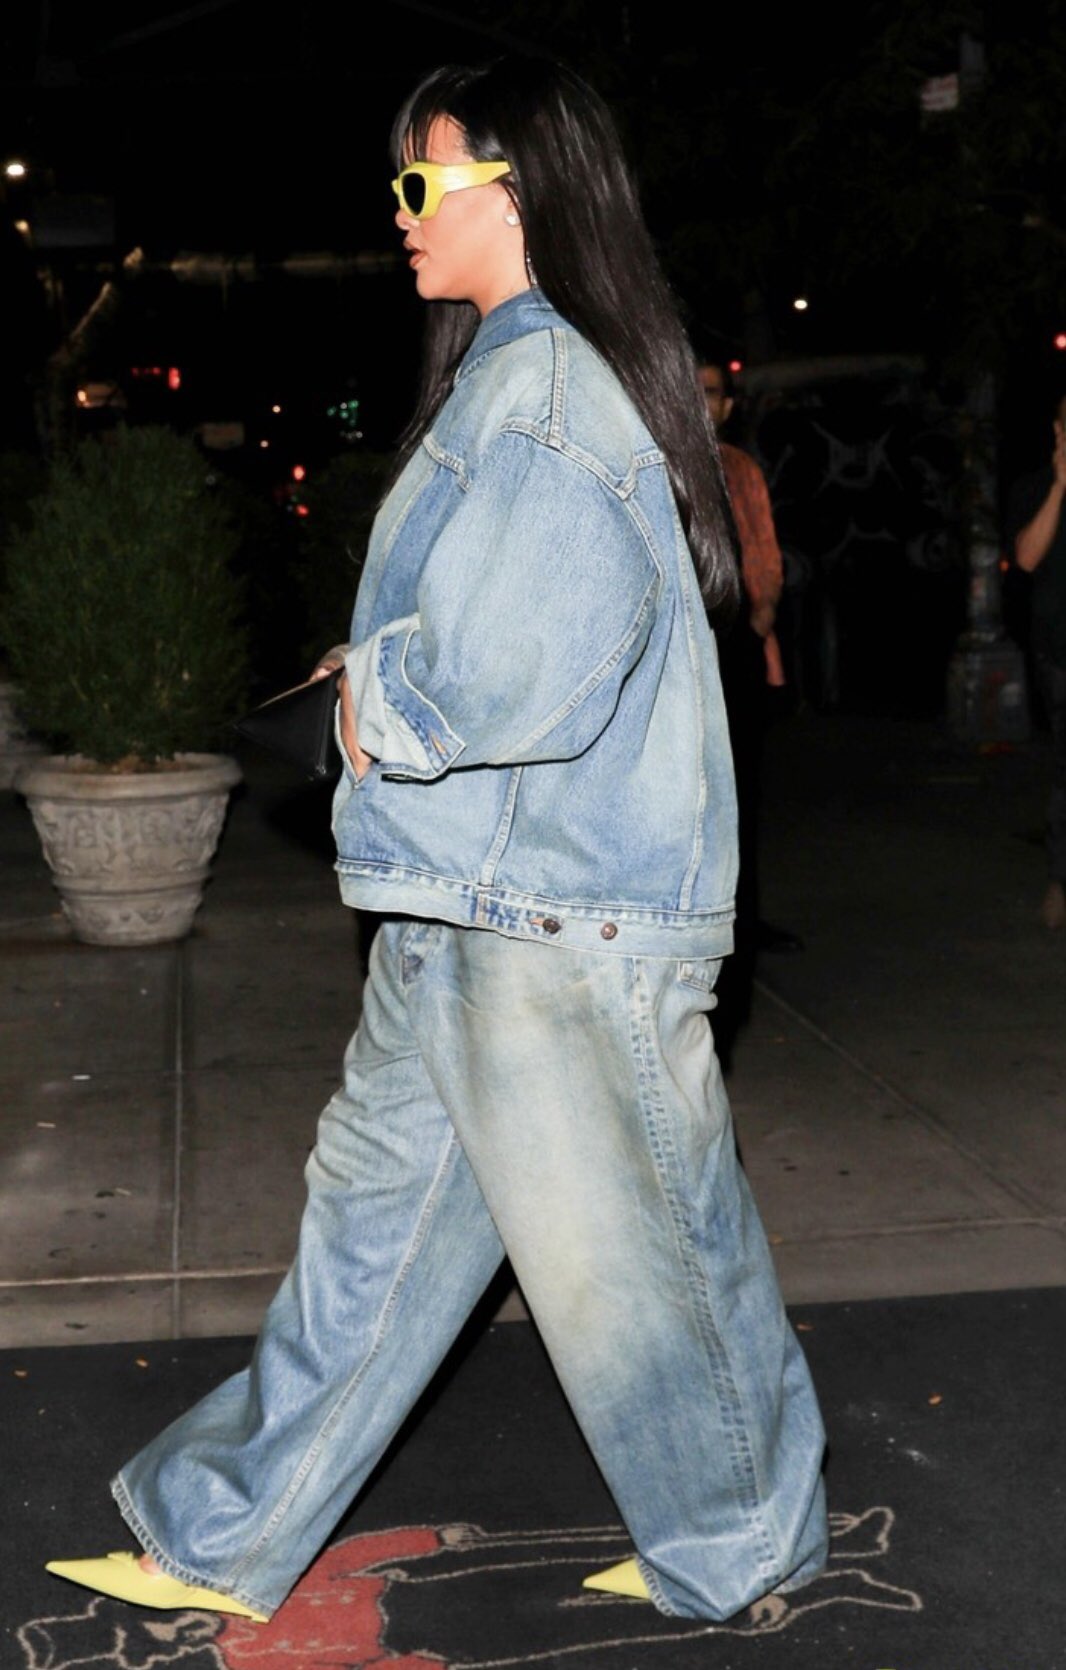 Rihanna returns to her hotel after a busy day out in NYC. #Rihanna Photos:  Backgrid